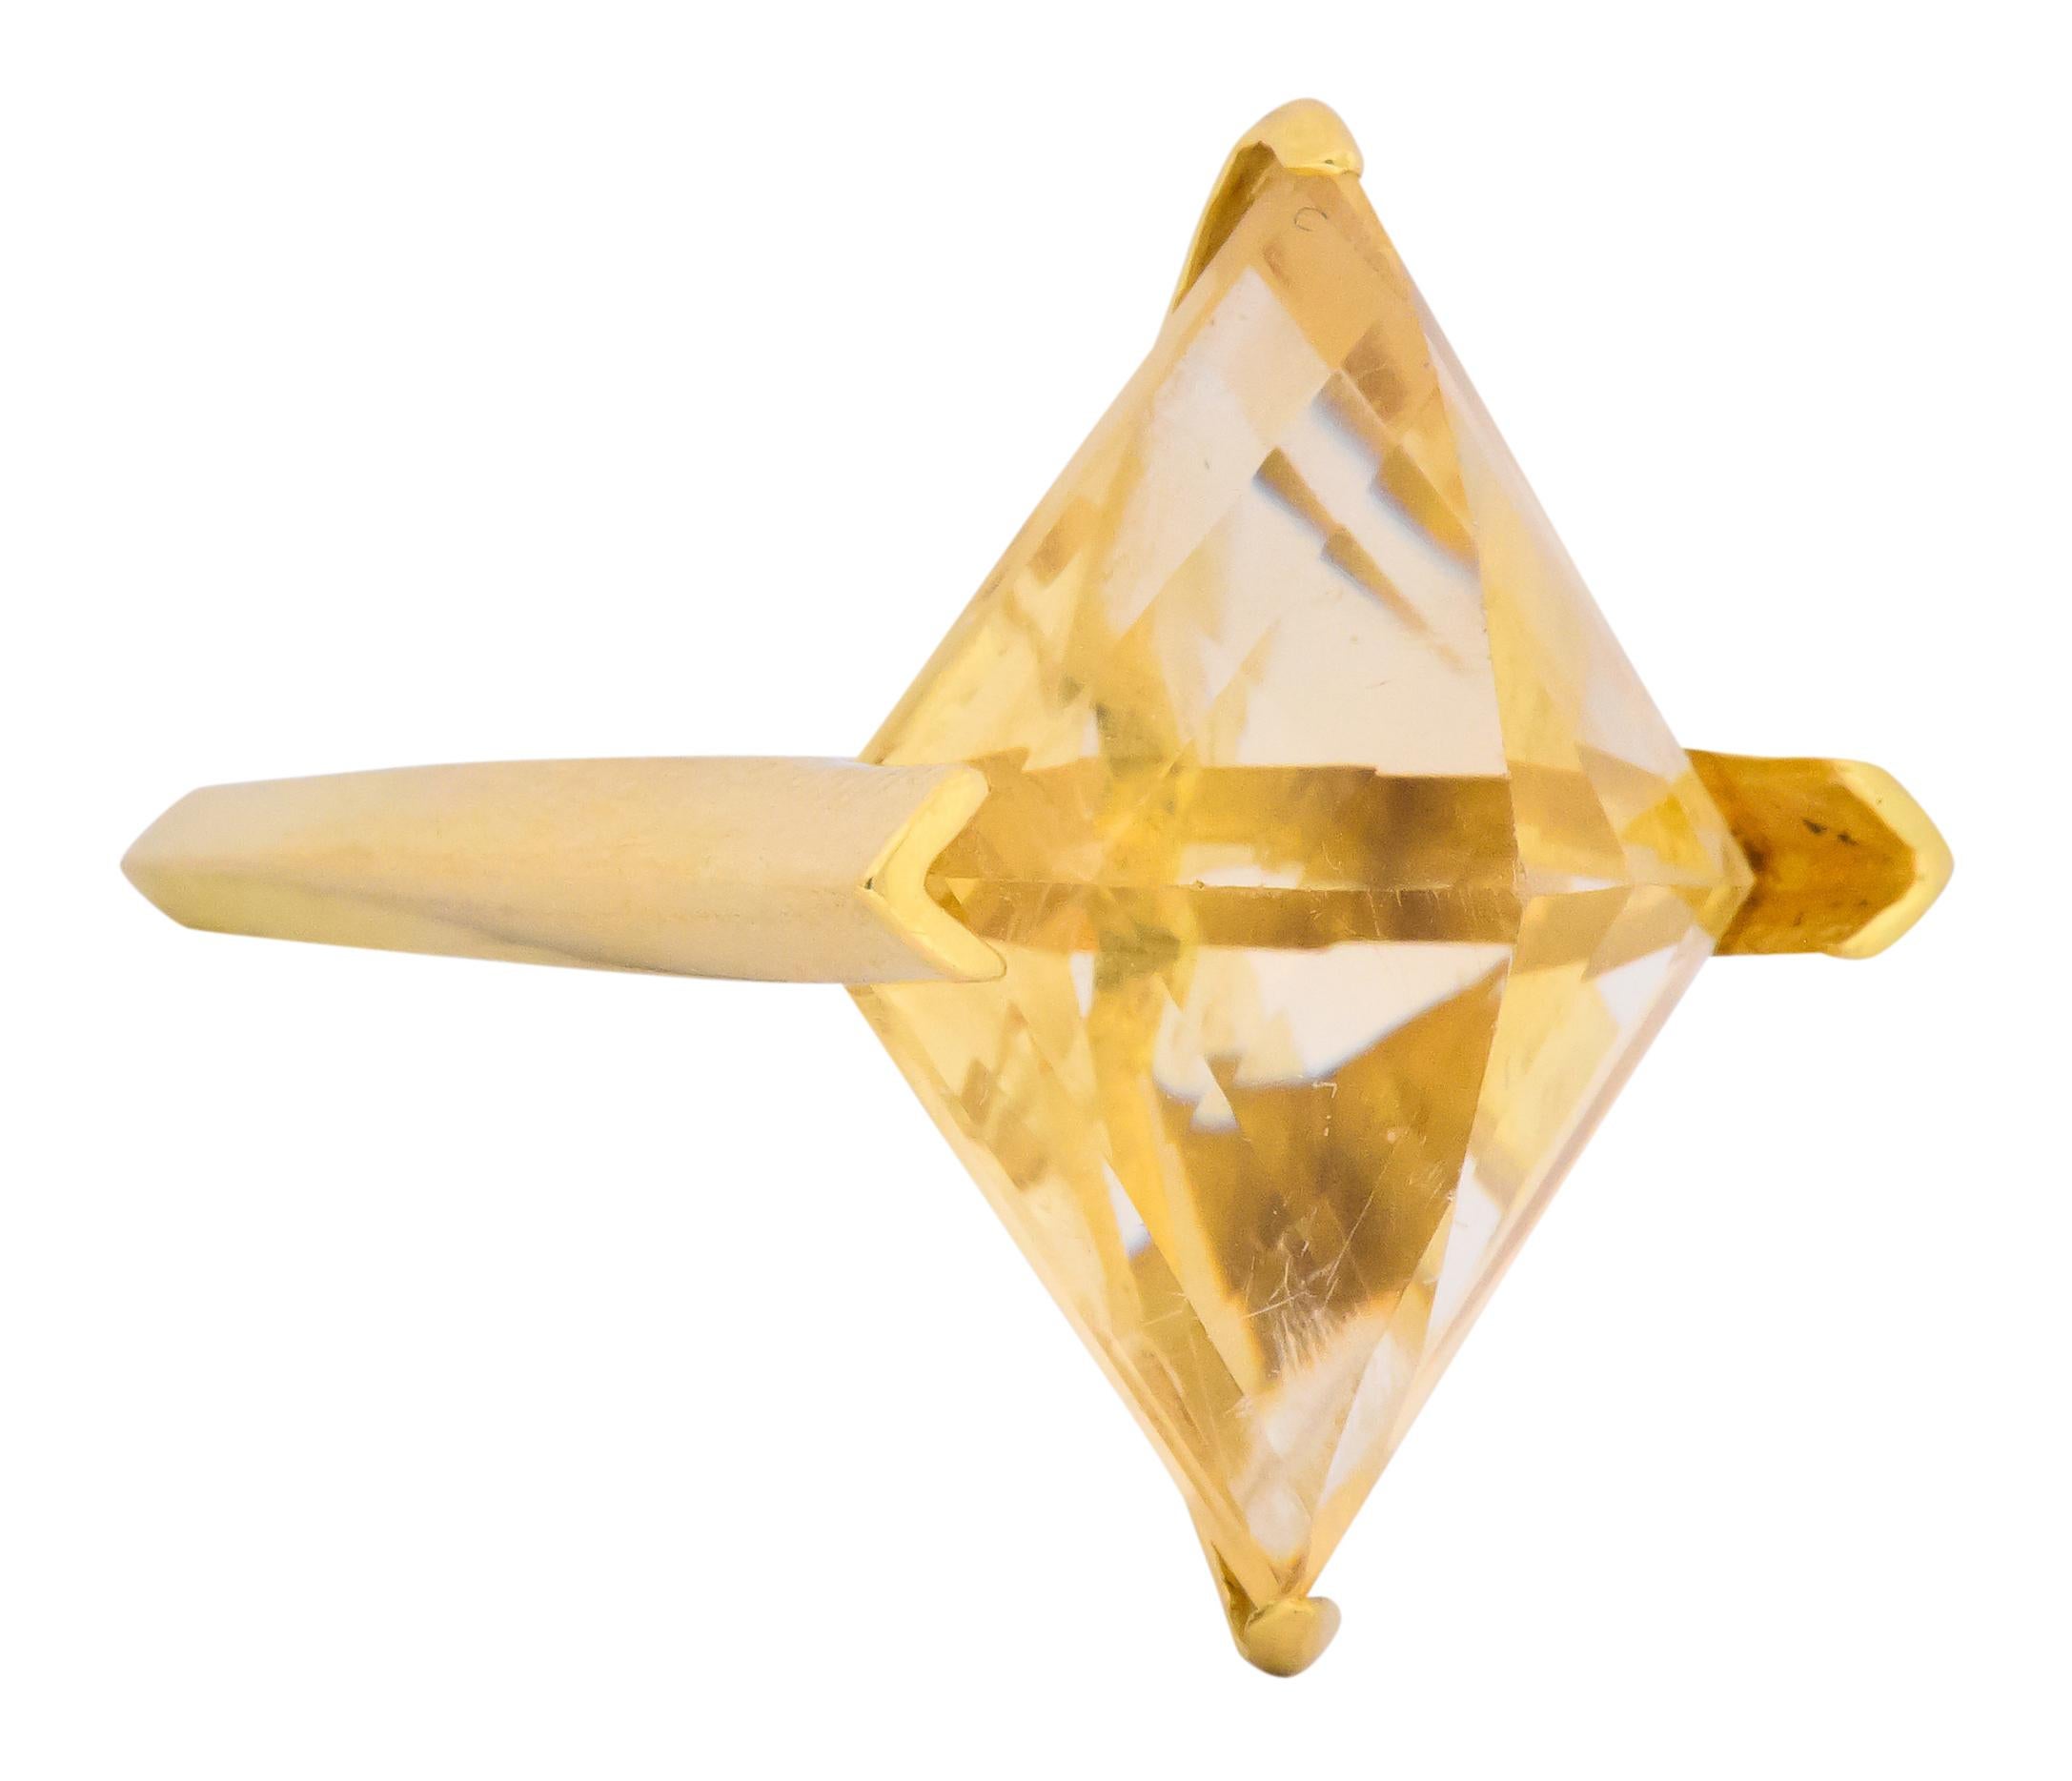 Centering a navette shaped, step and point cut citrine, measuring approximately 24.5 x 20.5 x 12.5 mm, bright medium yellow

In a geometric mount and shank

Signed GEP for Gillian Packard

With British hallmarks for 18 karat gold, London and